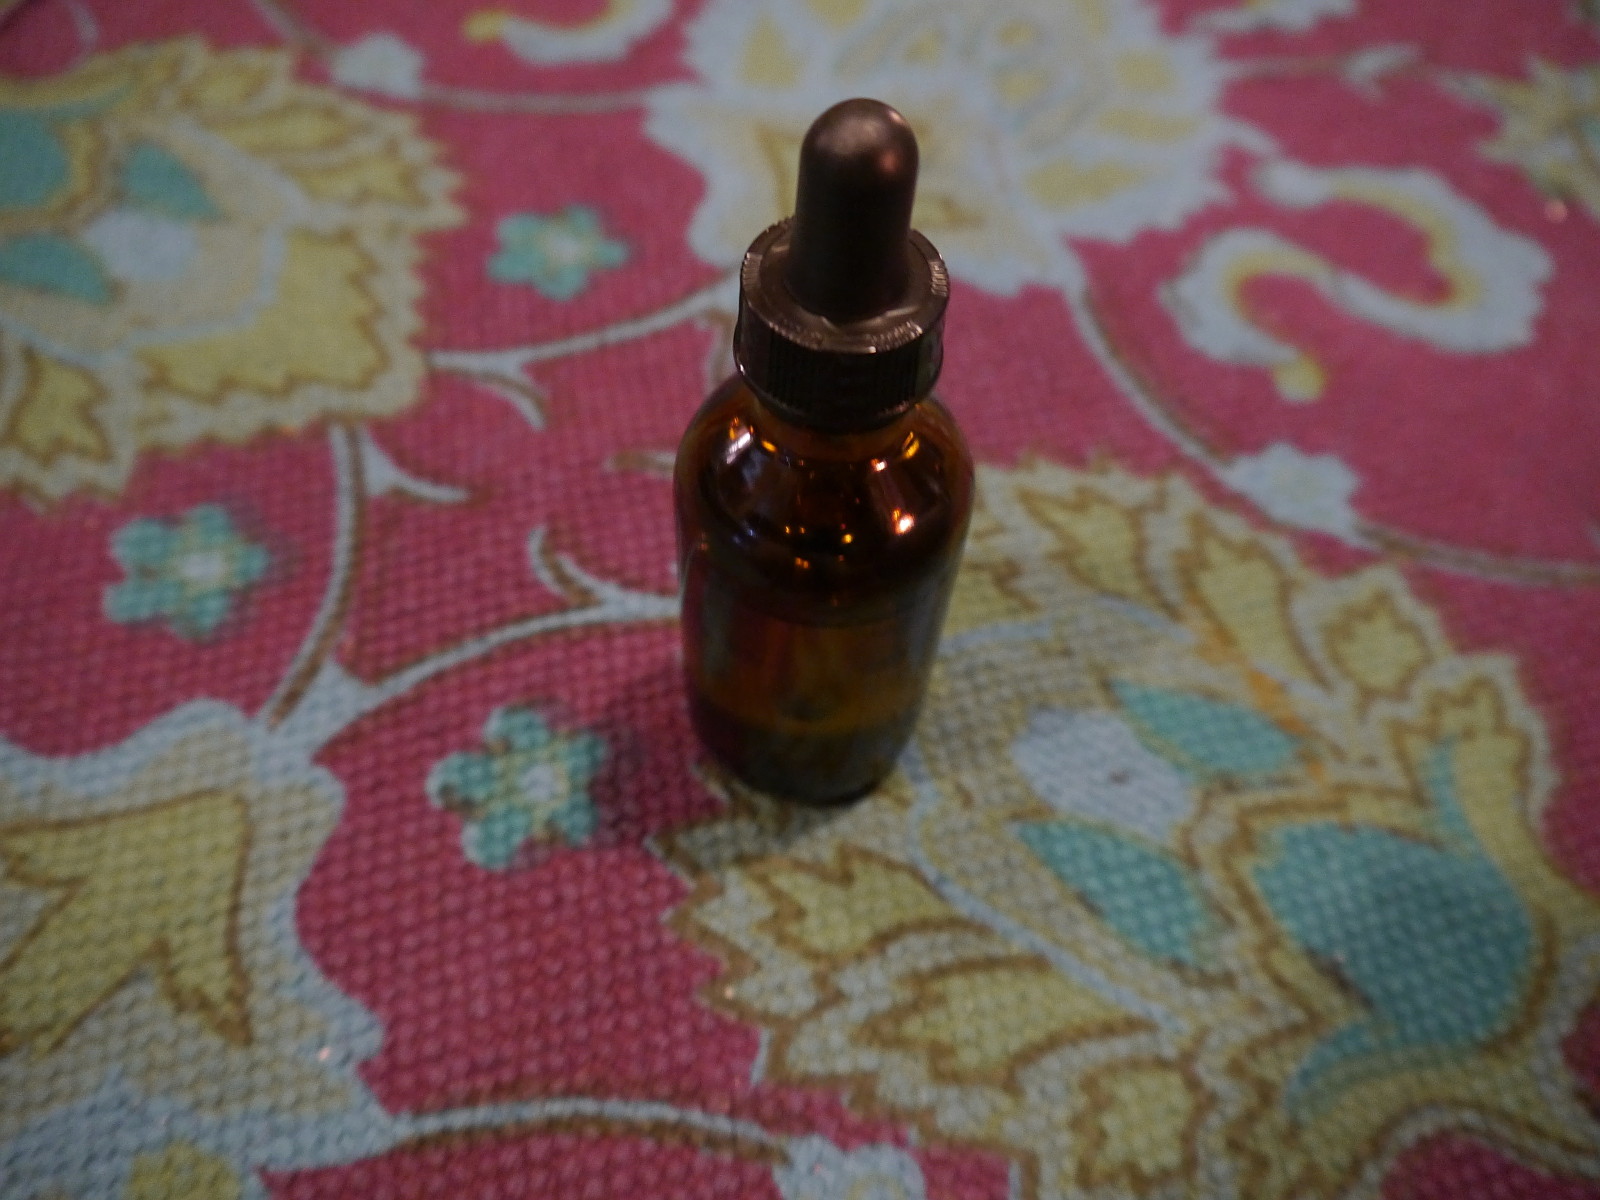 How To Make A Skin Clearing Serum One Green Planet